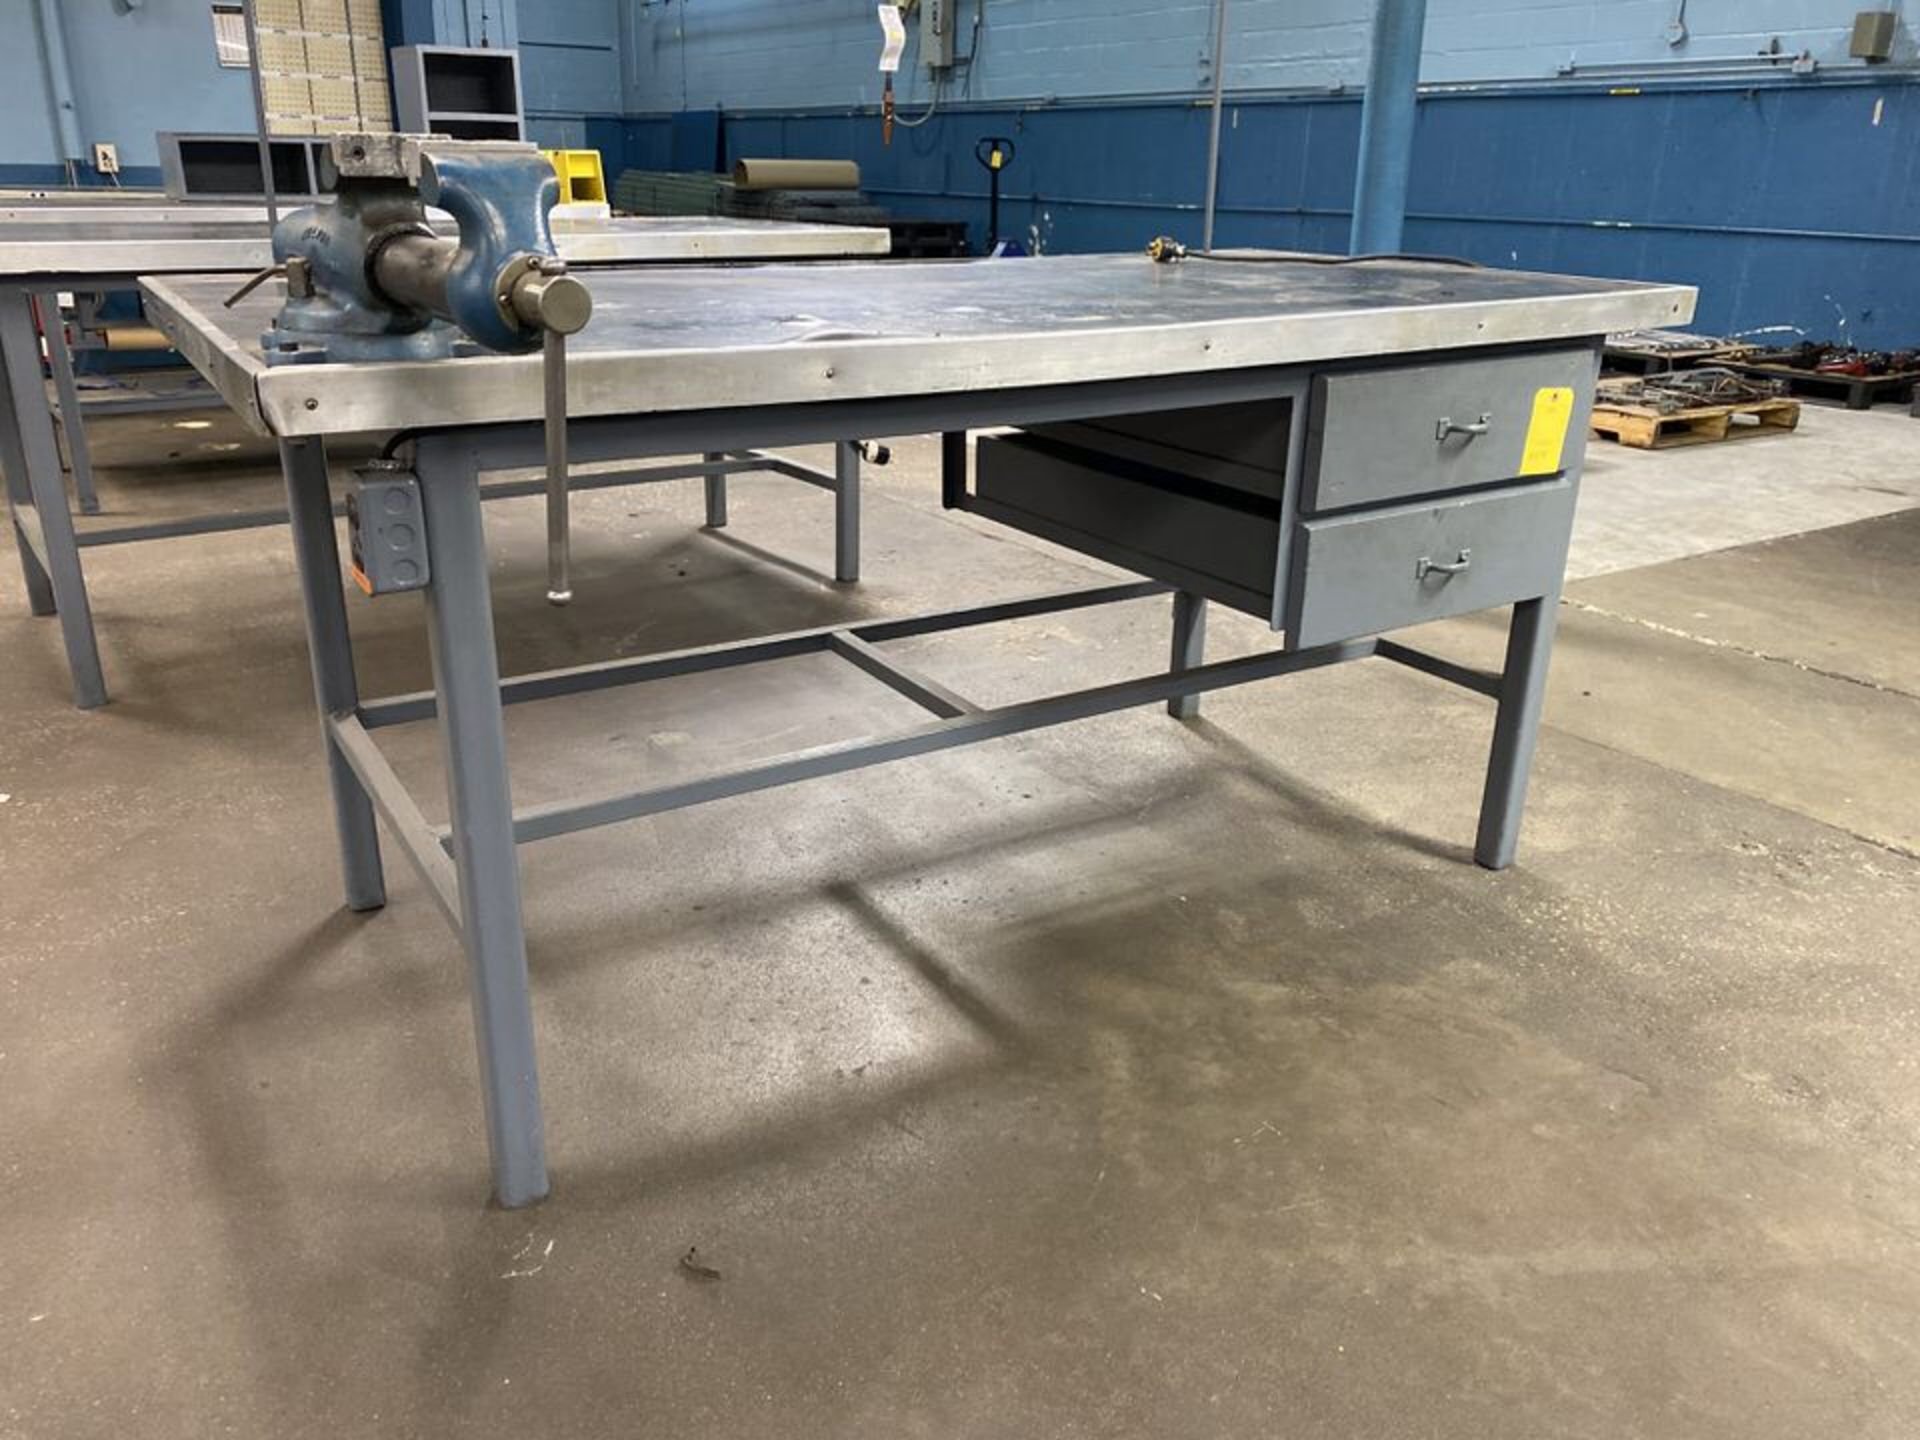 72" x 36" Metal Shop Table with 2 Drawers and Vise